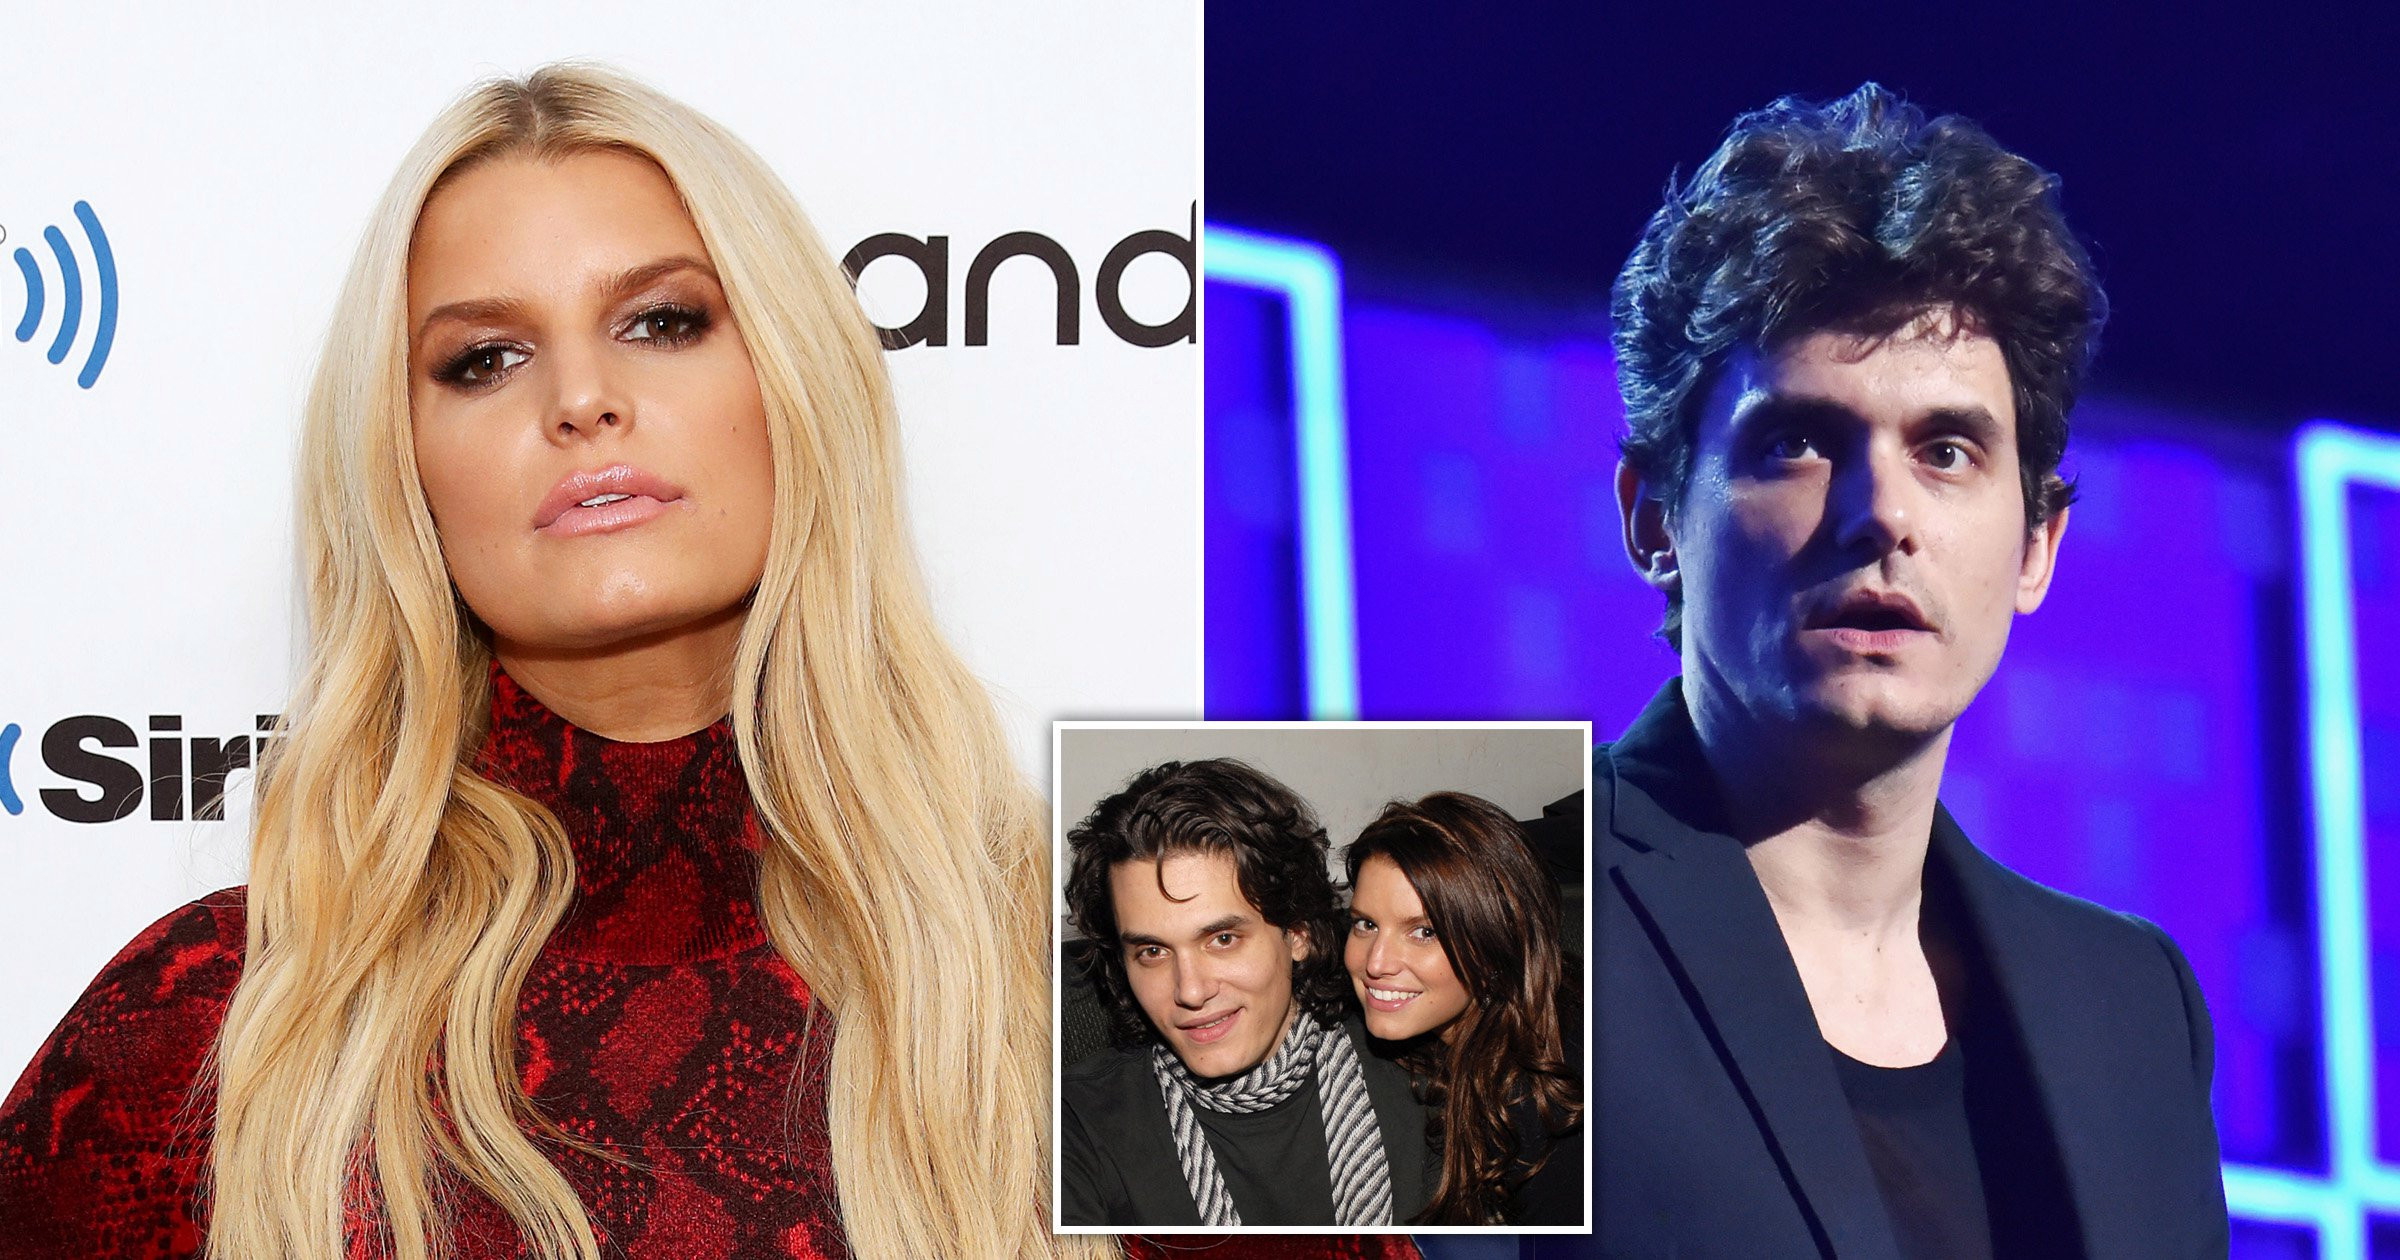 Jessica Simpson says she doesn’t want a public apology from John Mayer over ‘sexual napalm’ comment: ‘You can’t take it back’